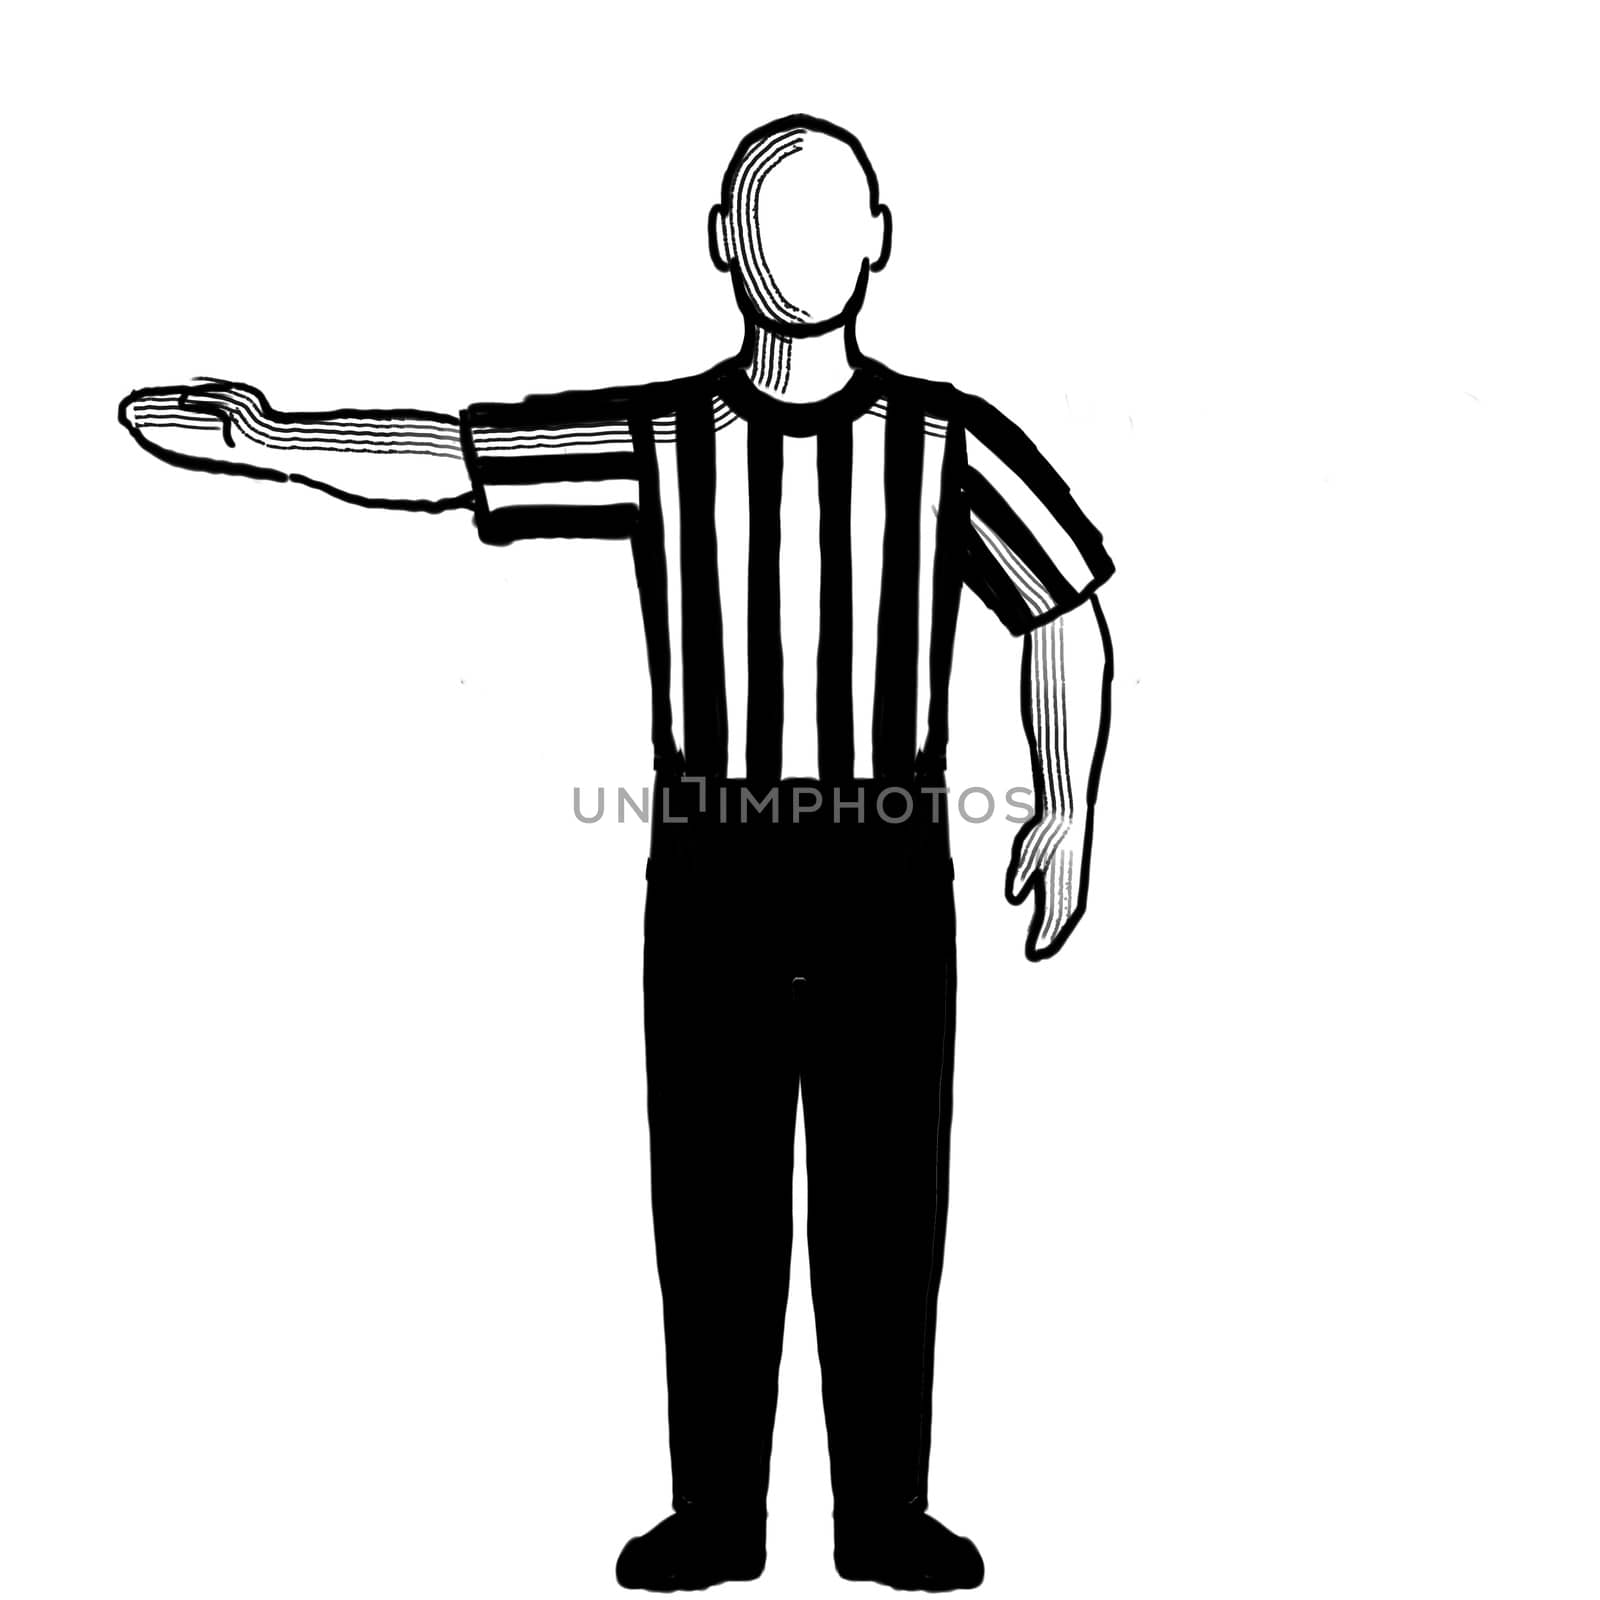 Black and white illustration showing a basketball referee or official with hand signal of delayed lane violation viewed from front on isolated background done retro style.